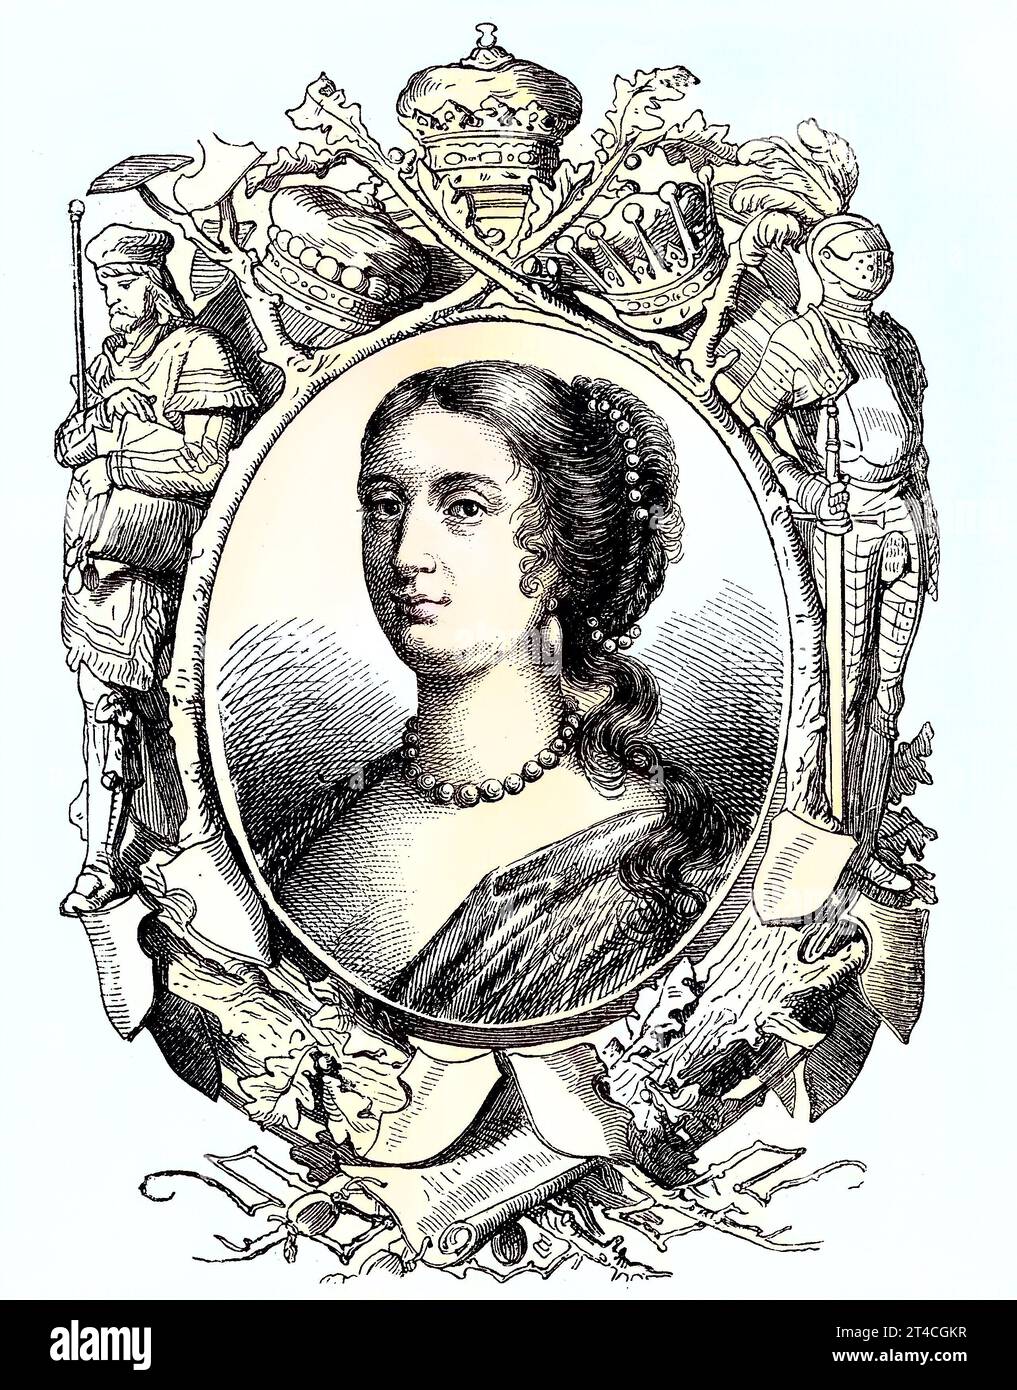 Rachel, Lady Russell, Lady Rachel Wriothesley, 1636 -1723, eine englische Adelige, Erbin und Autorin, Reproduktion eines Holzschnitts aus dem Jahr 1880, digital verbessert  /  Rachel, Lady Russell, Lady Rachel Wriothesley, 1636 -1723, an English noblewoman, heiress, and author., reproduction of a woodcut from the year 1880, digital improved Stock Photo